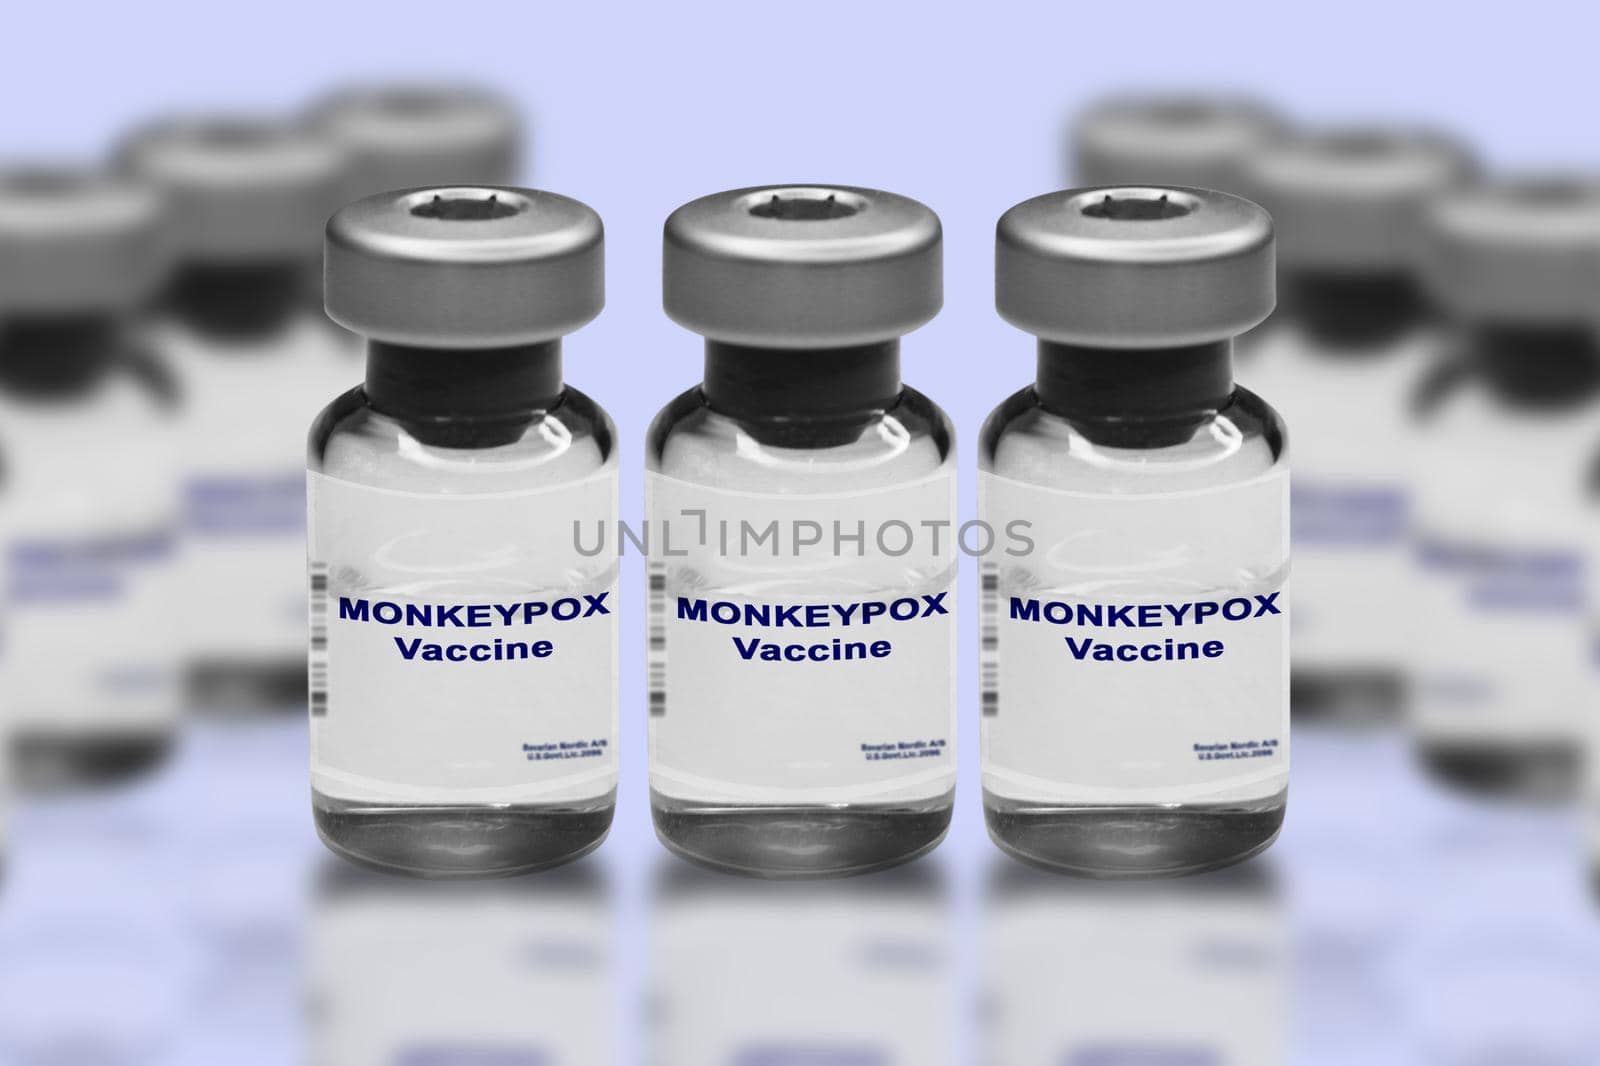 Monkeypox vaccine close-up on a light mirror background. In the background are blurred vaccine vials..